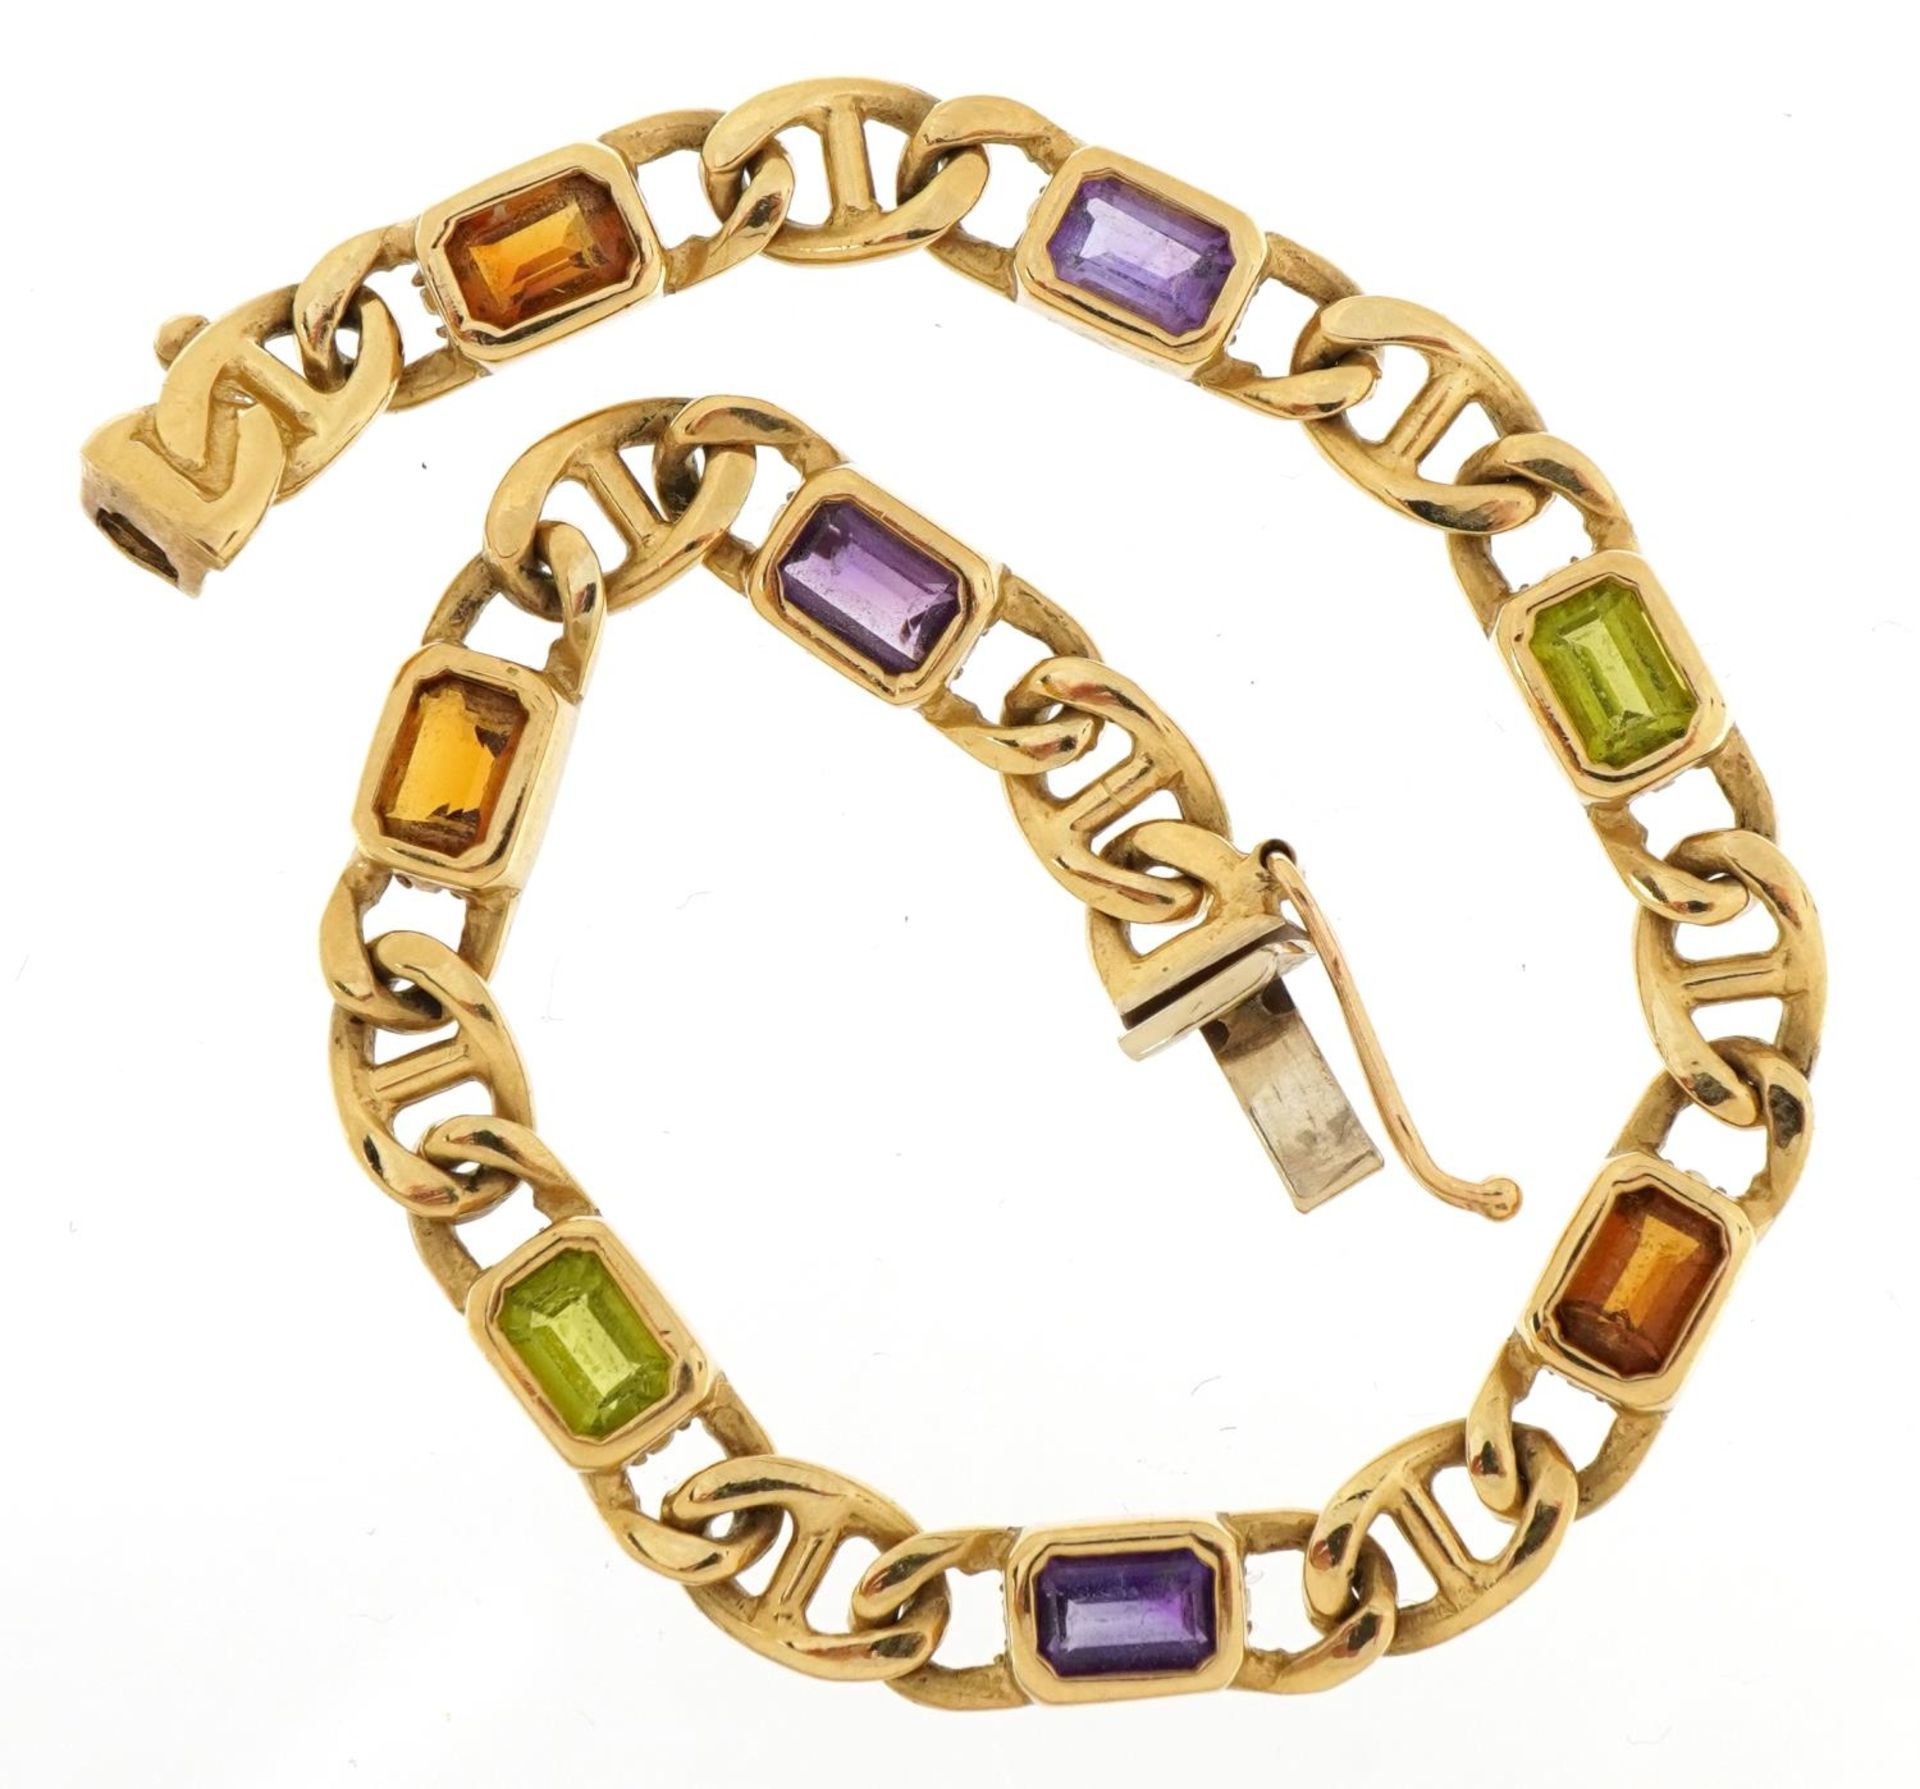 9ct gold curb link design bracelet set with purple, green and orange stones, 17.5cm in length, 12.4g - Image 2 of 4